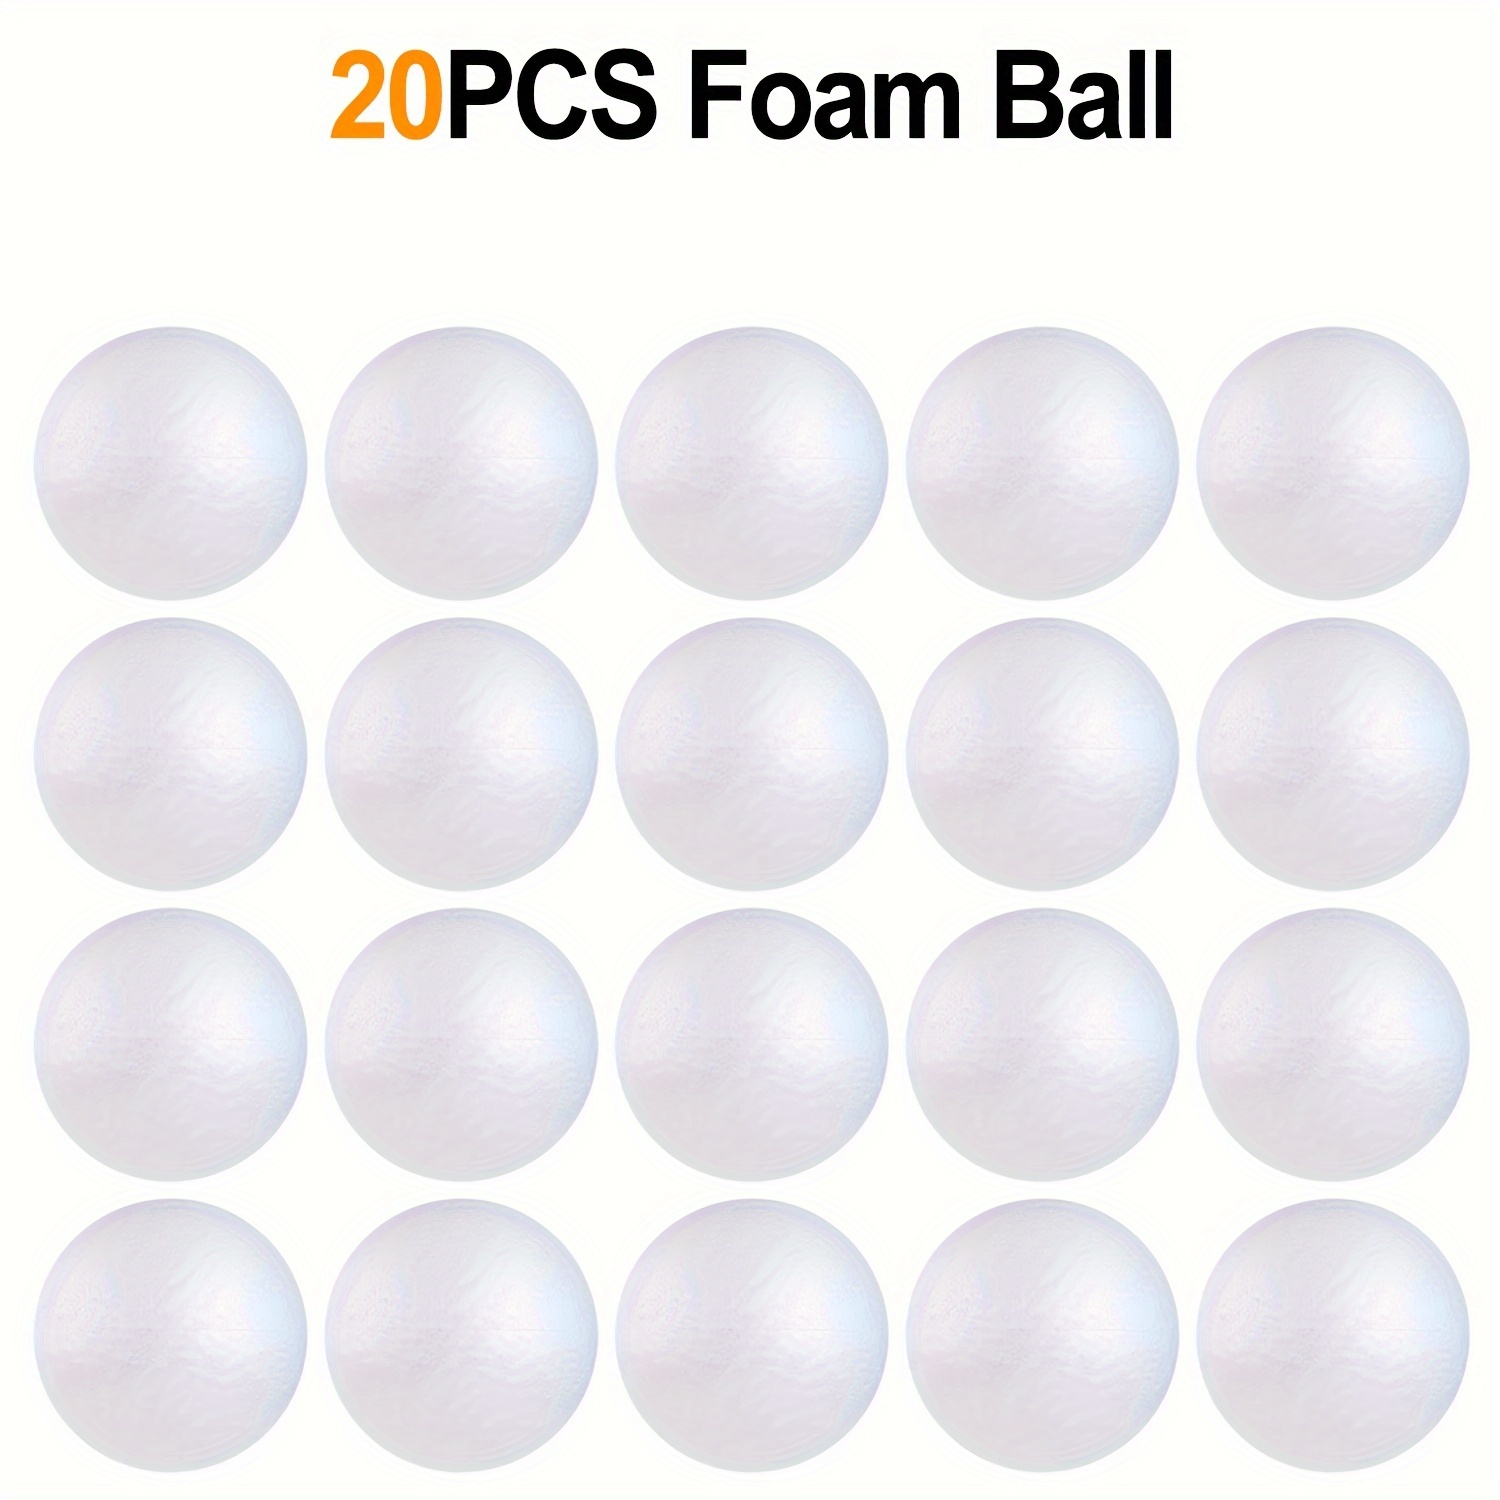 28-Pack Craft Styrofoam Balls, 2 Inches in Diamete, Smooth and Durable Foam  Balls, for DIY Crafting and Decoration, White